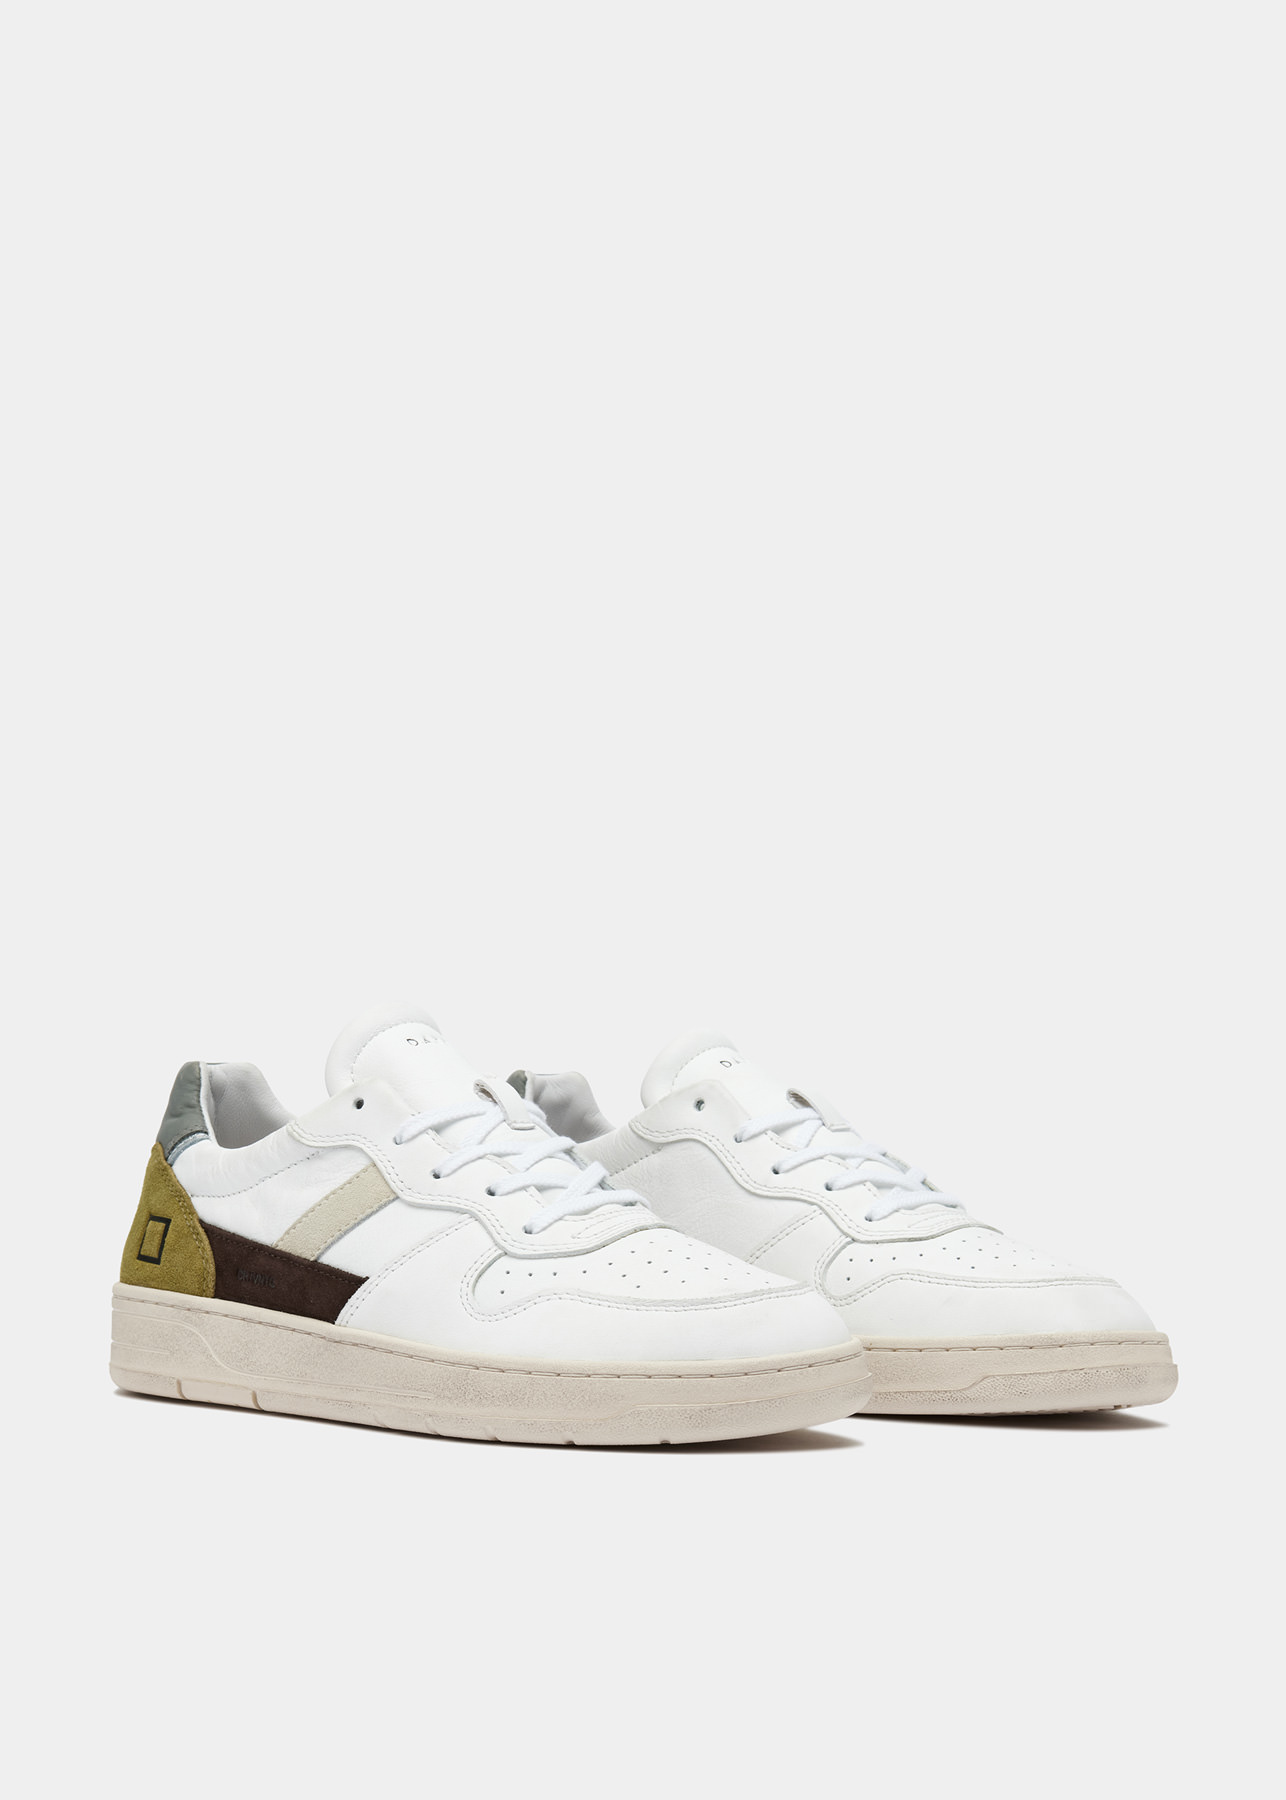 Date Sneakers COURT 2.0 VINTAGE CALF IVORY